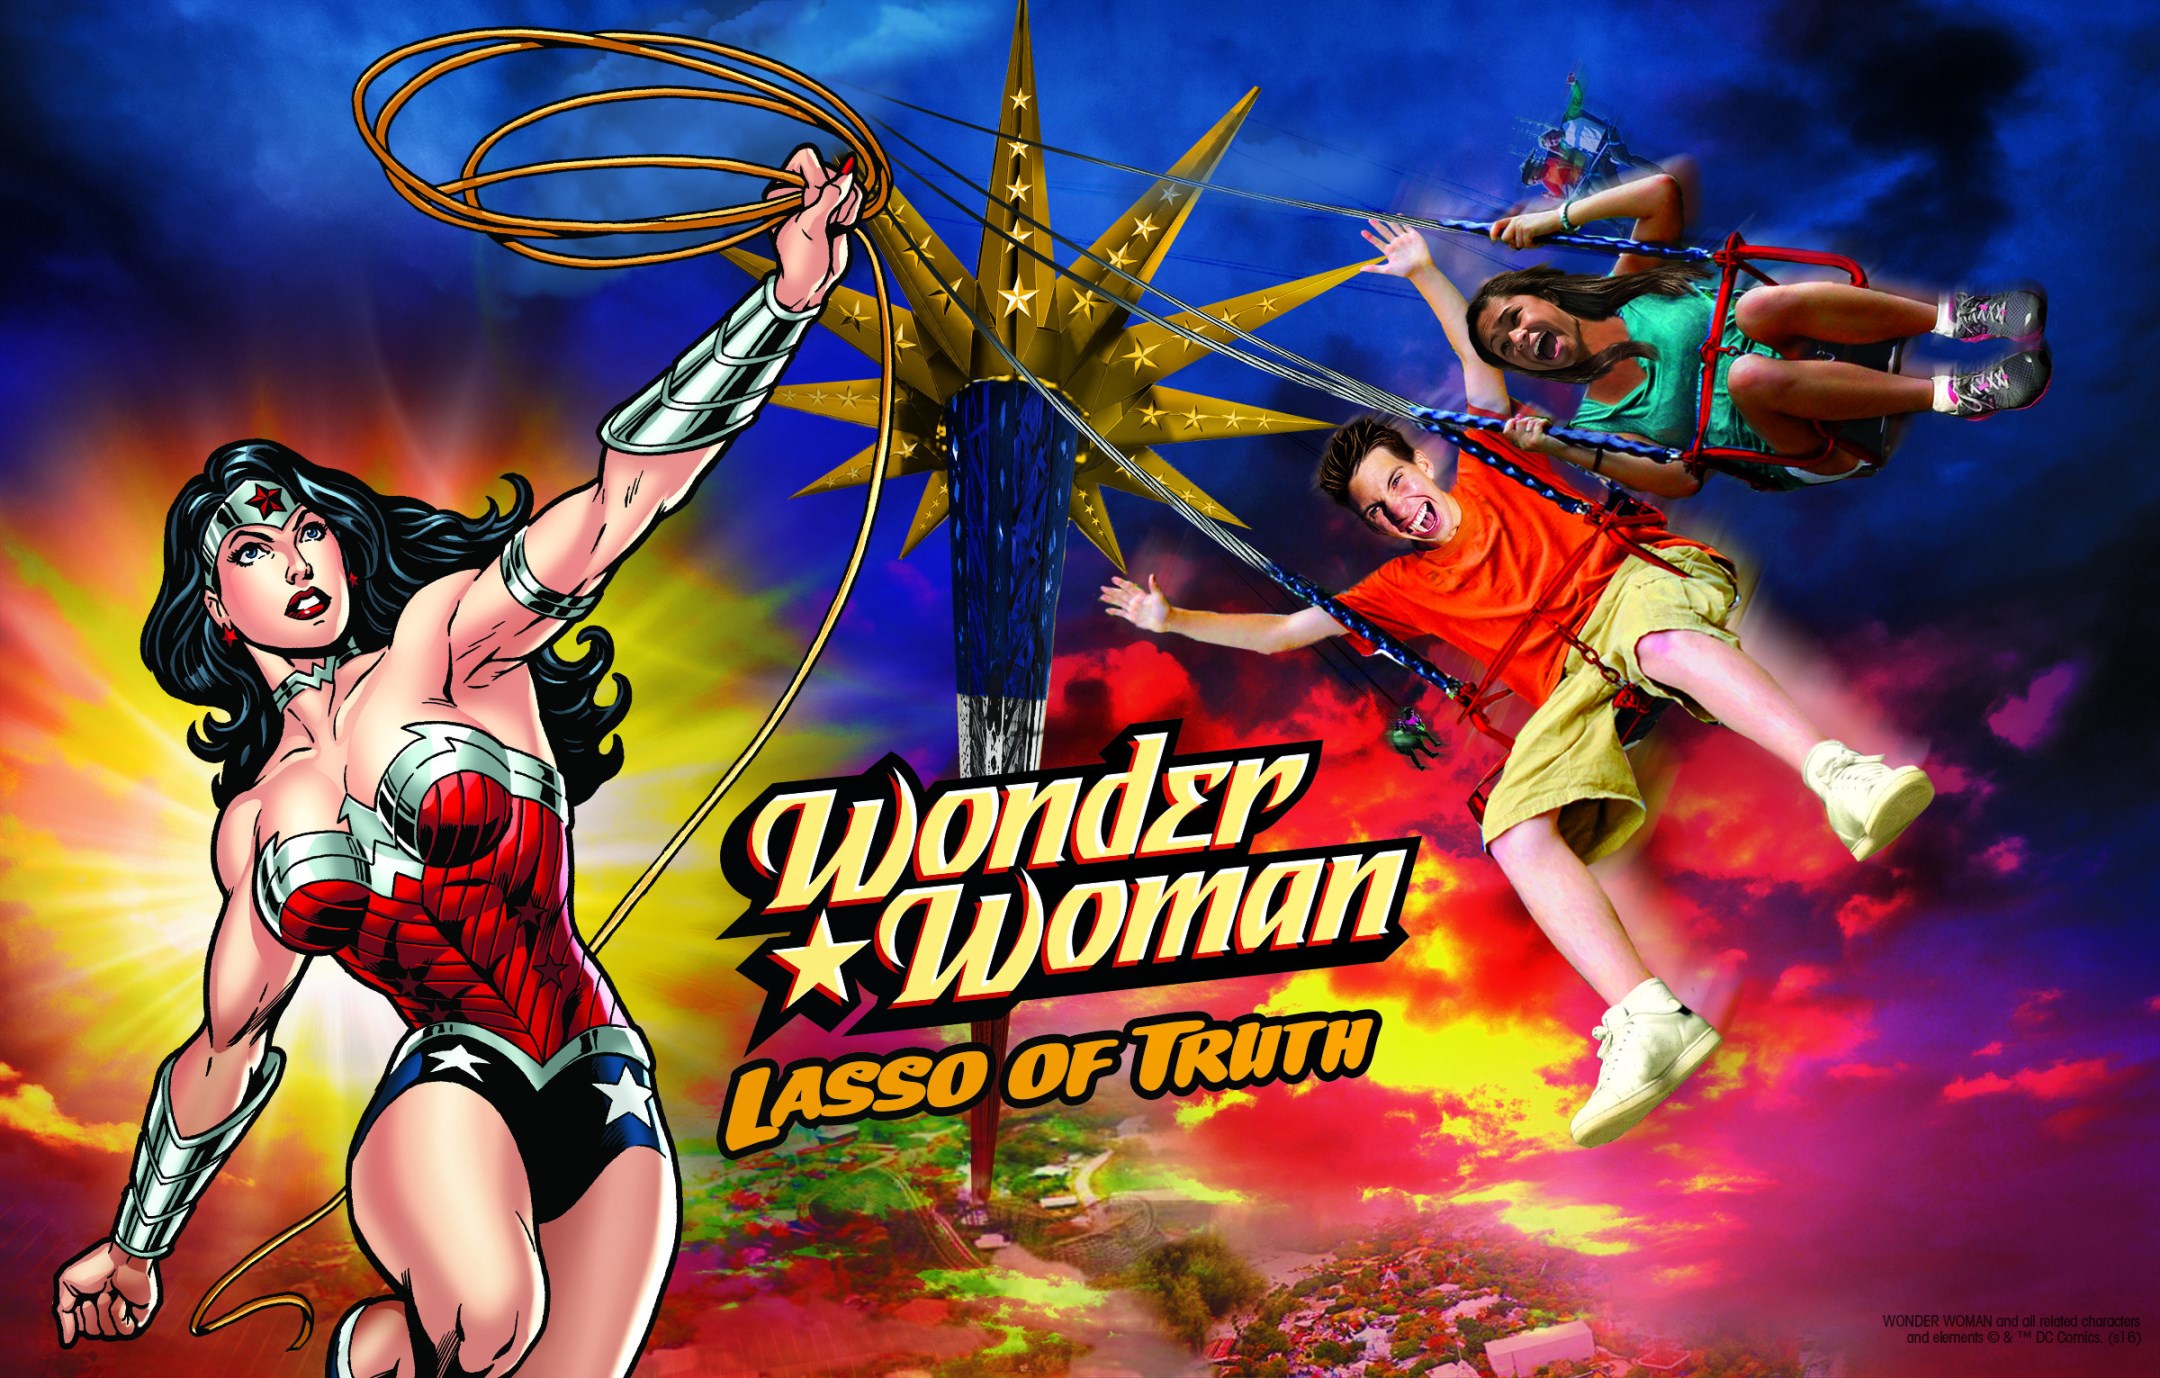 Six Flags America is getting a Wonder Woman themed Star Flyer in 2017.